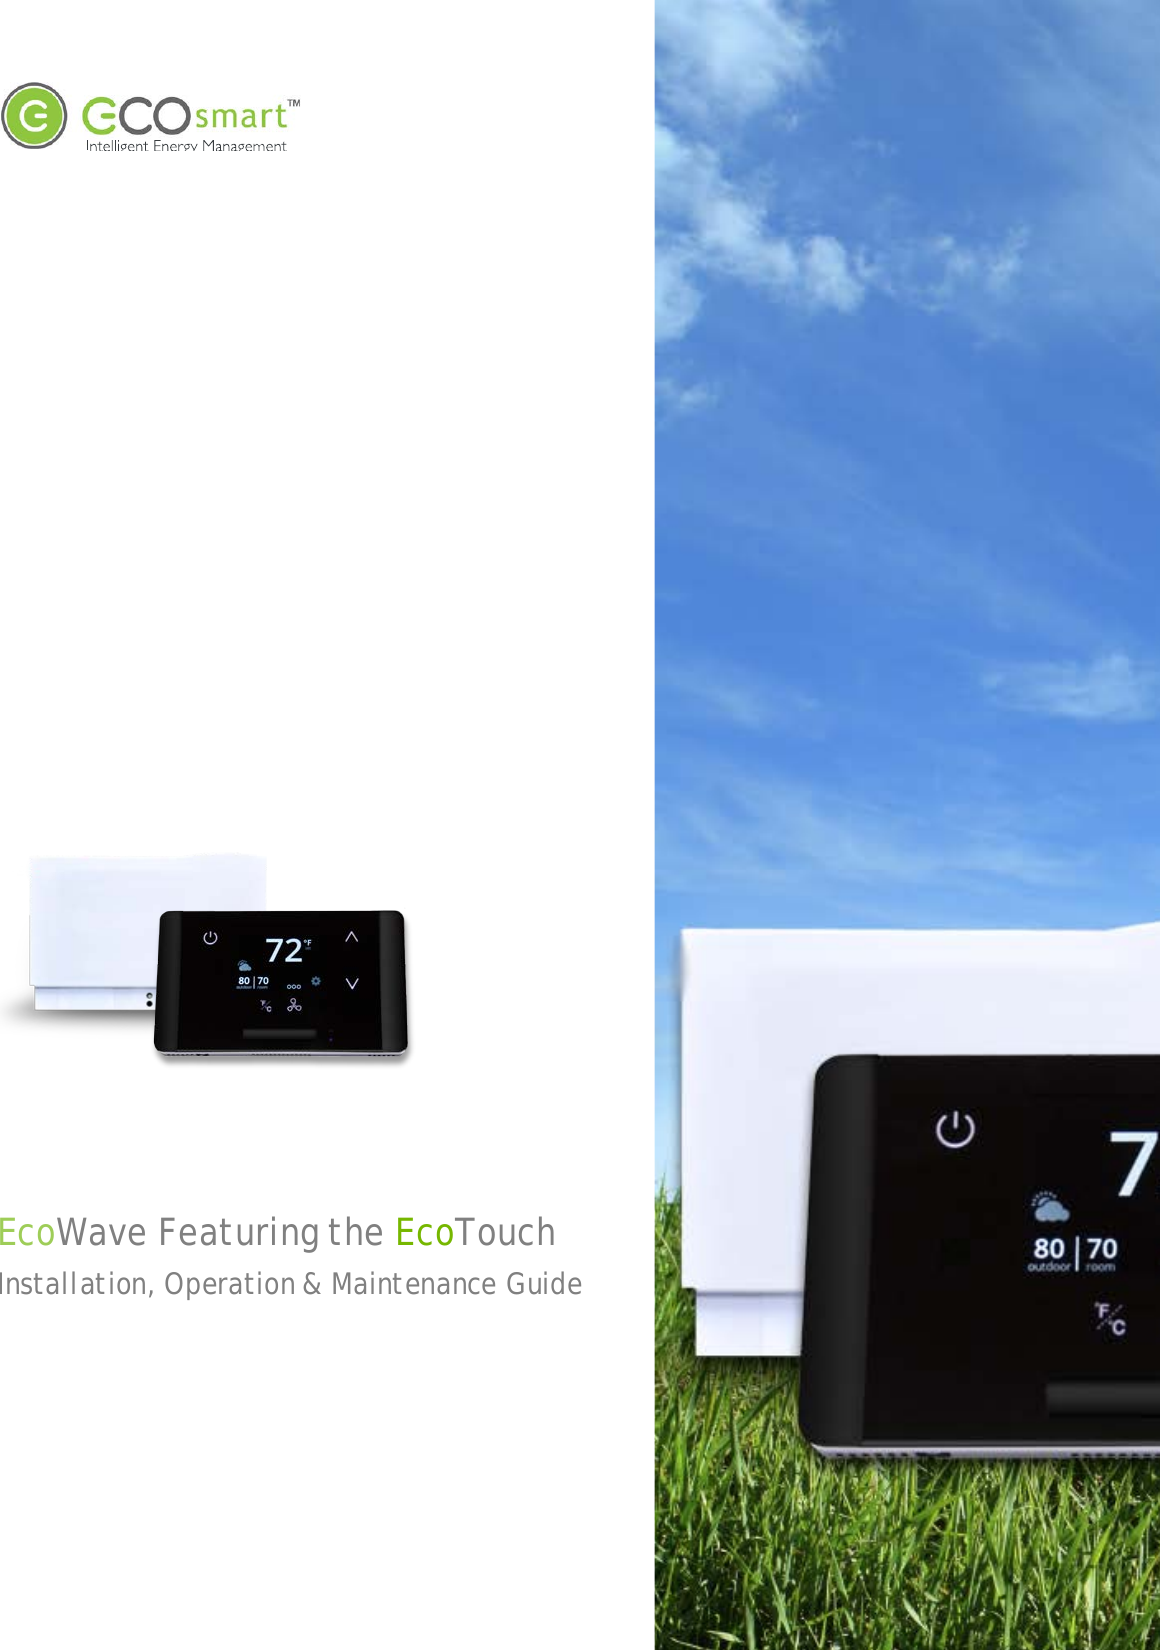                             EcoWave Featuring the EcoTouch Installation, Operation &amp; Maintenance Guide   